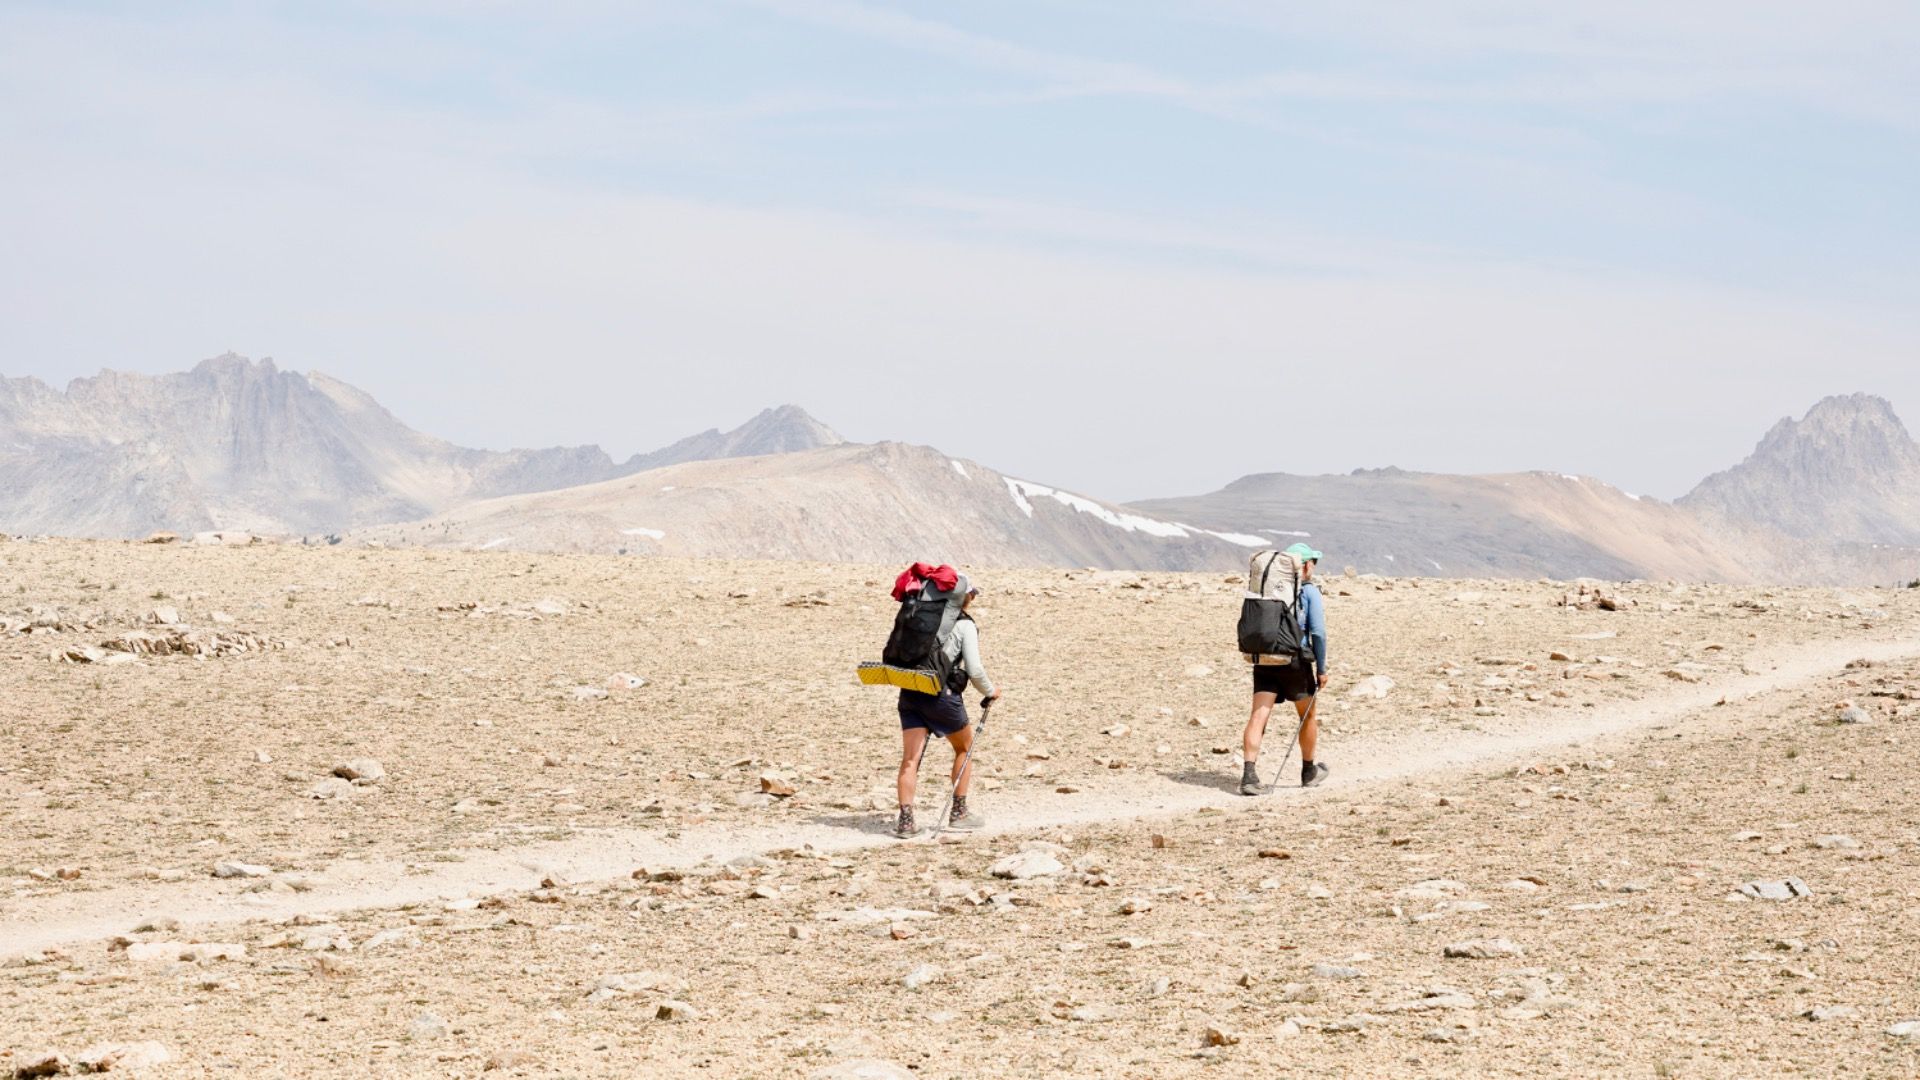 Hikers heading to Forester Pass Mountain Landscapes in the Sierra Nevada Range of California on the Pacific Crest Trail.